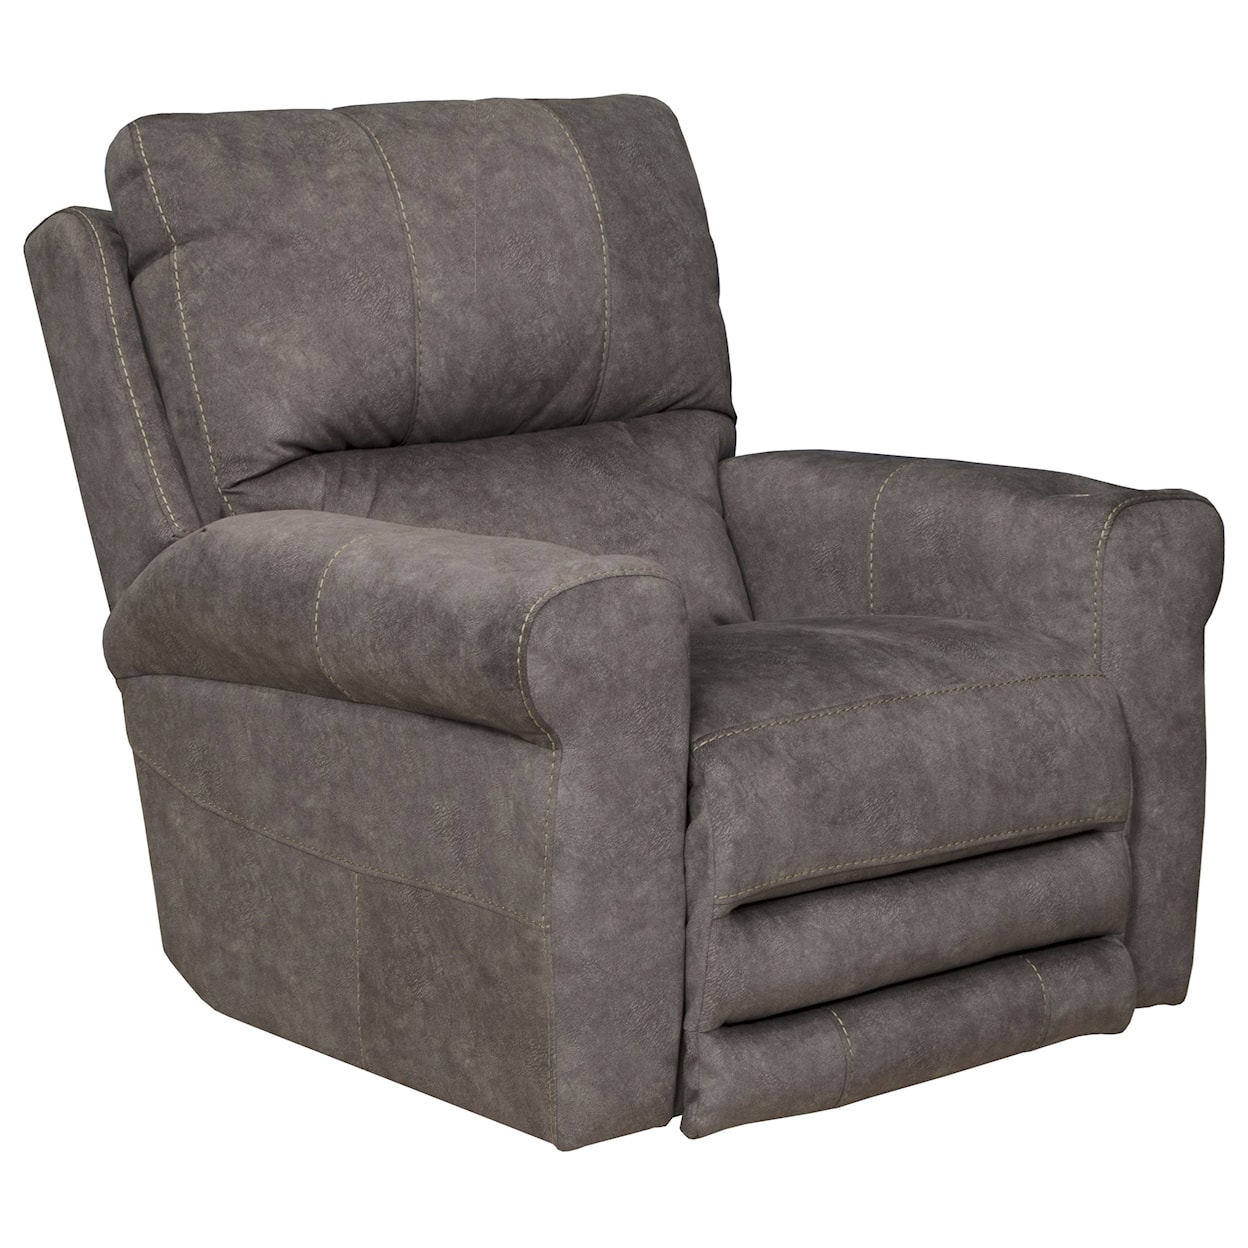 Catnapper 4786 Vance Voice-Controlled Power Lay Flat Recliner